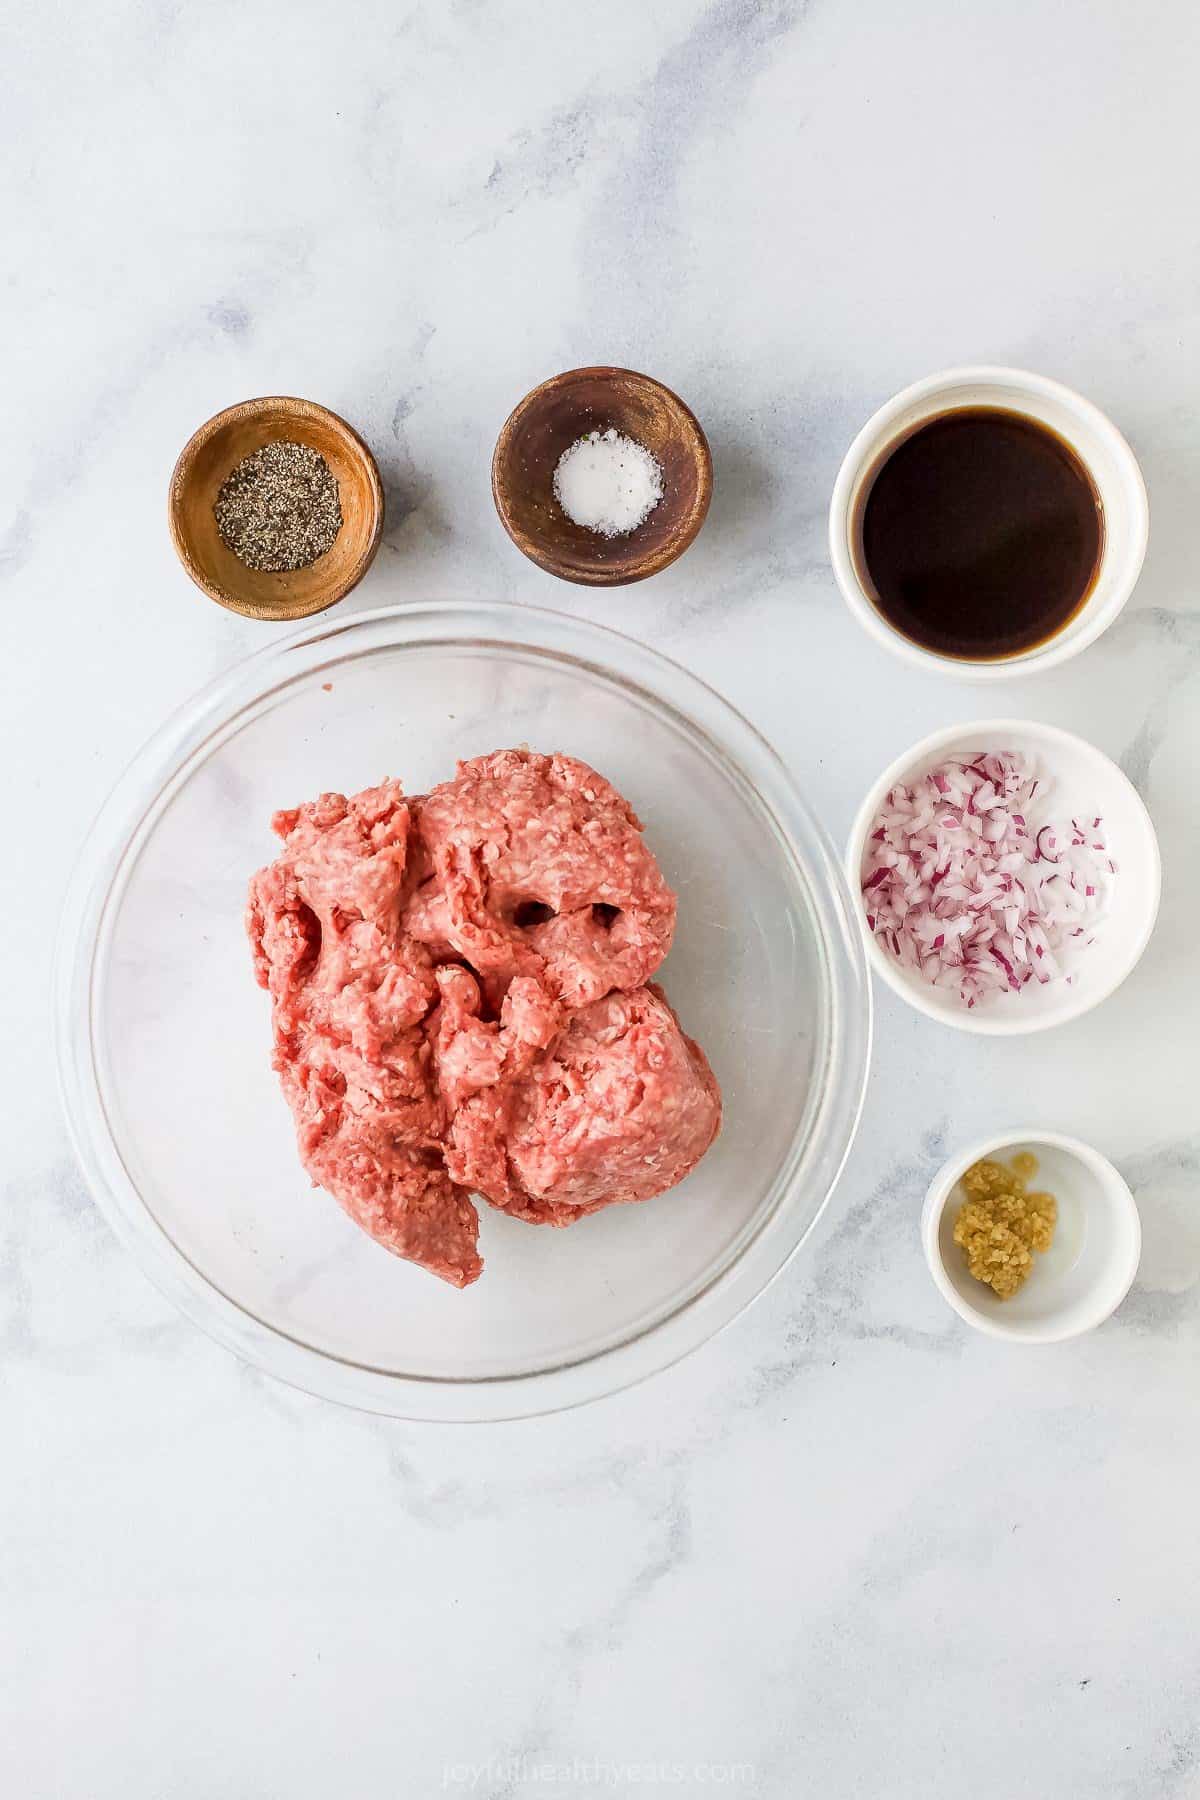 Ingredients to make air fryer burgers like ground beef, worcestershire sauce, red onions, garlic, salt, and pepper